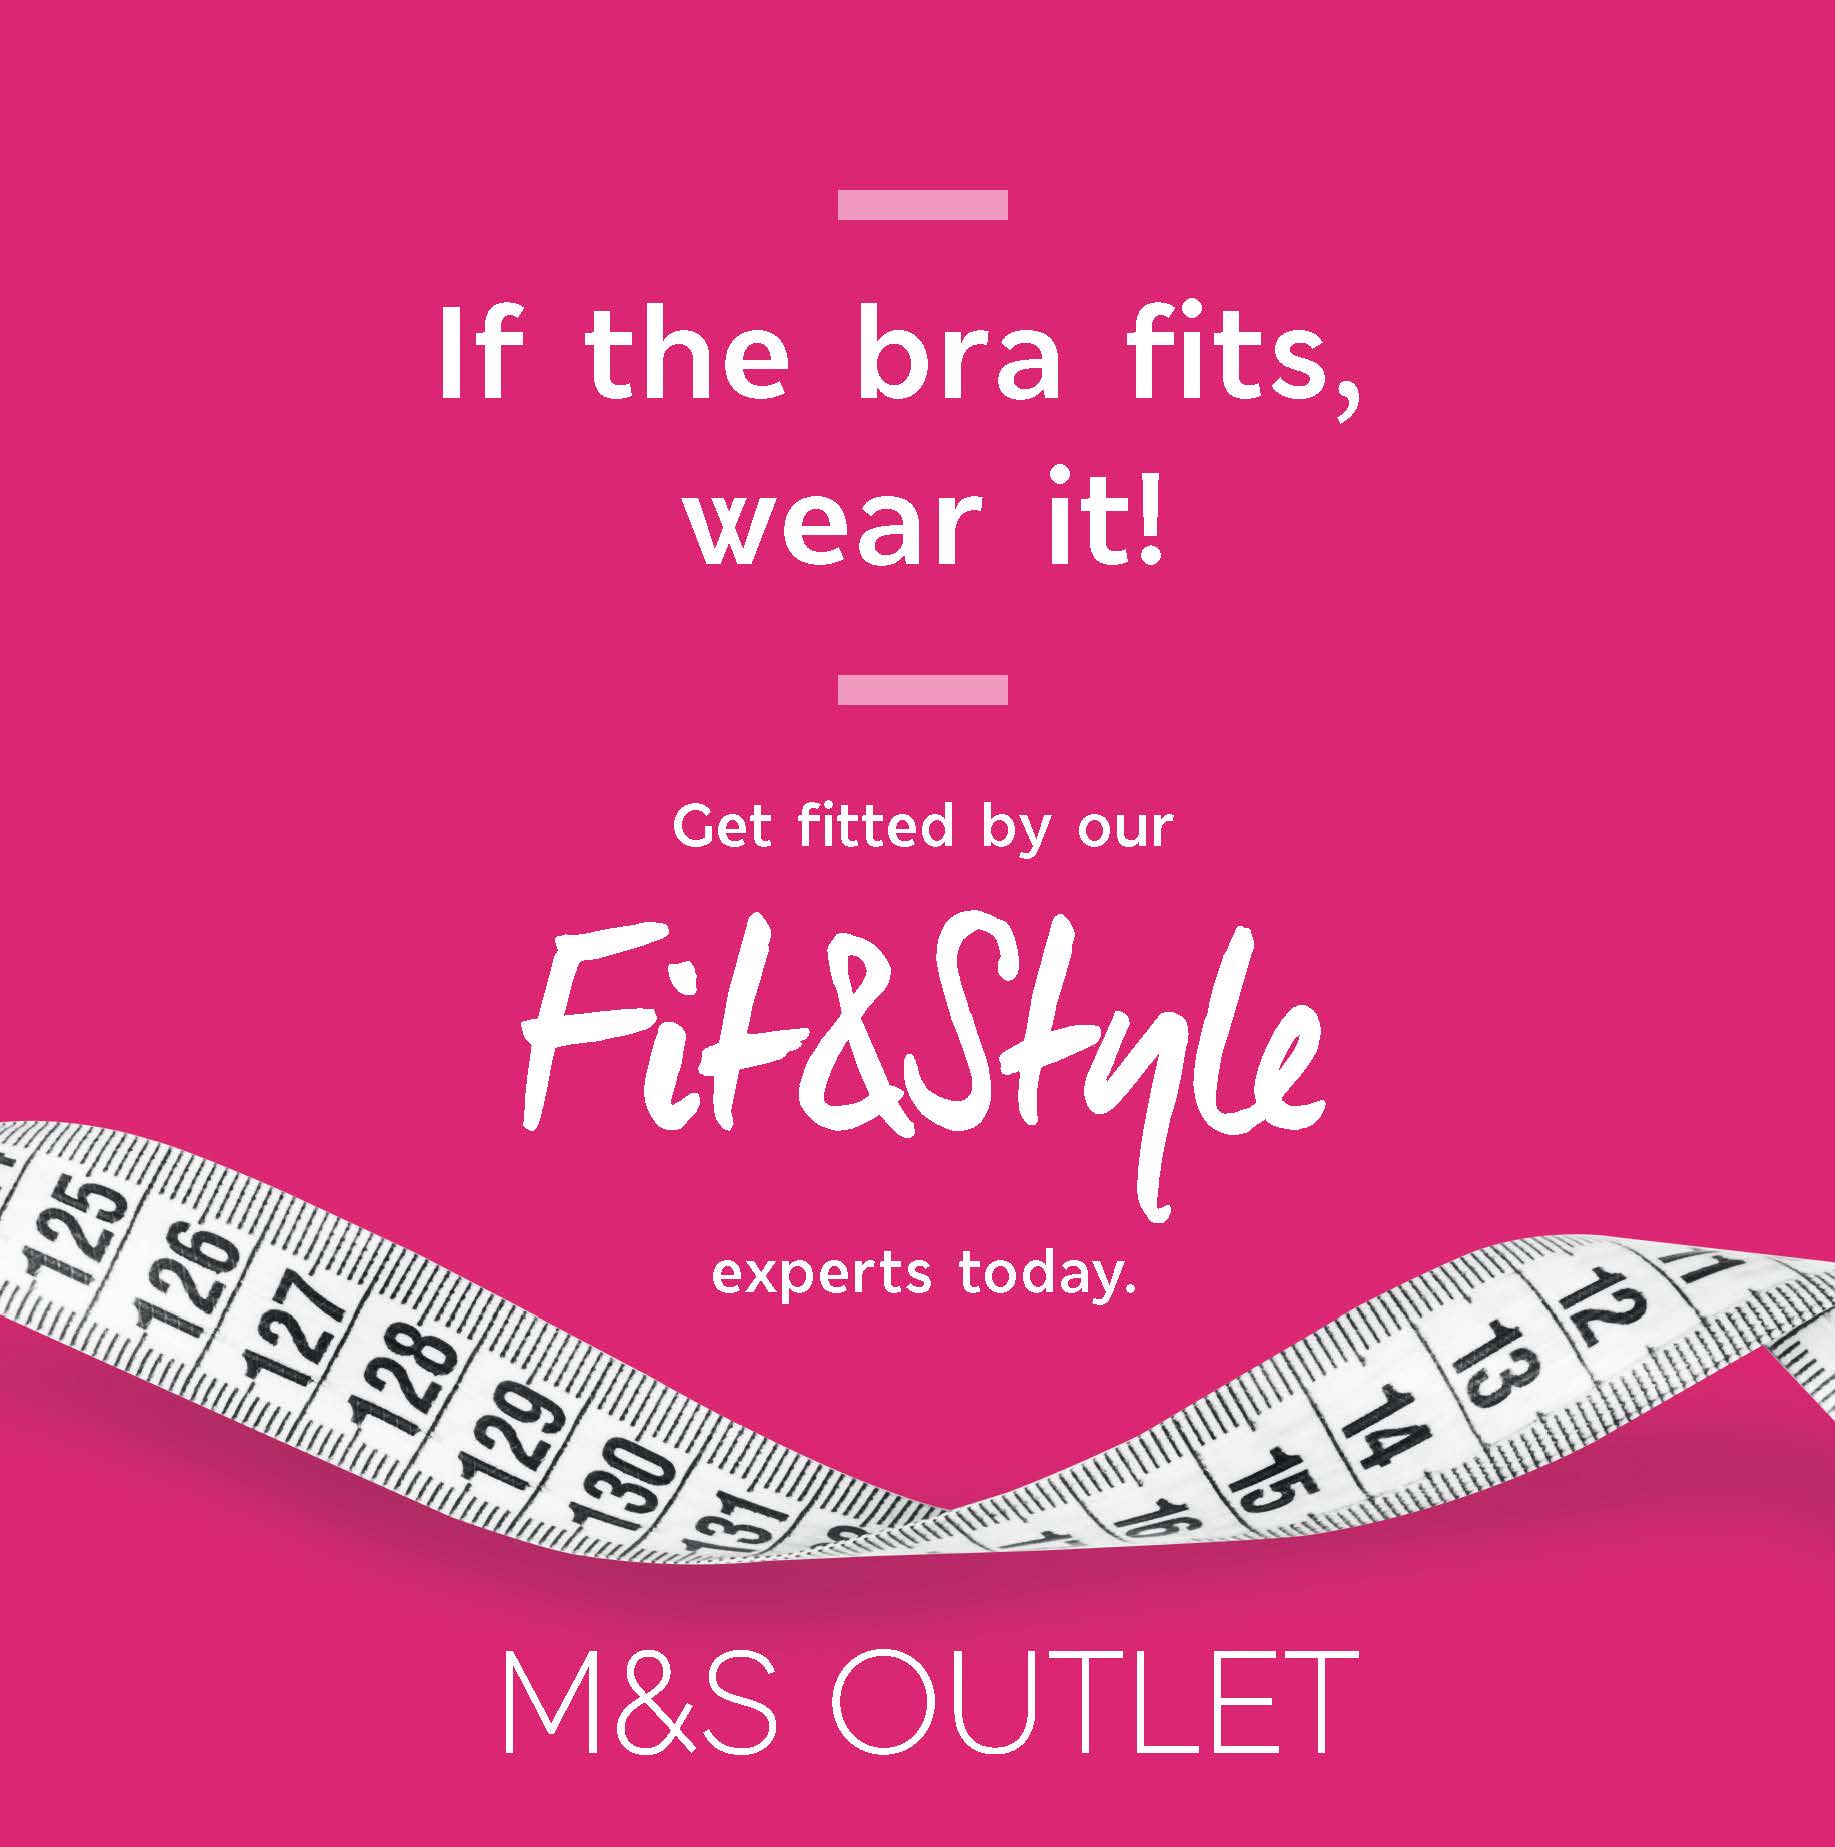 The Bra Fit Campaign with M&S Outlet – West Bromwich Business